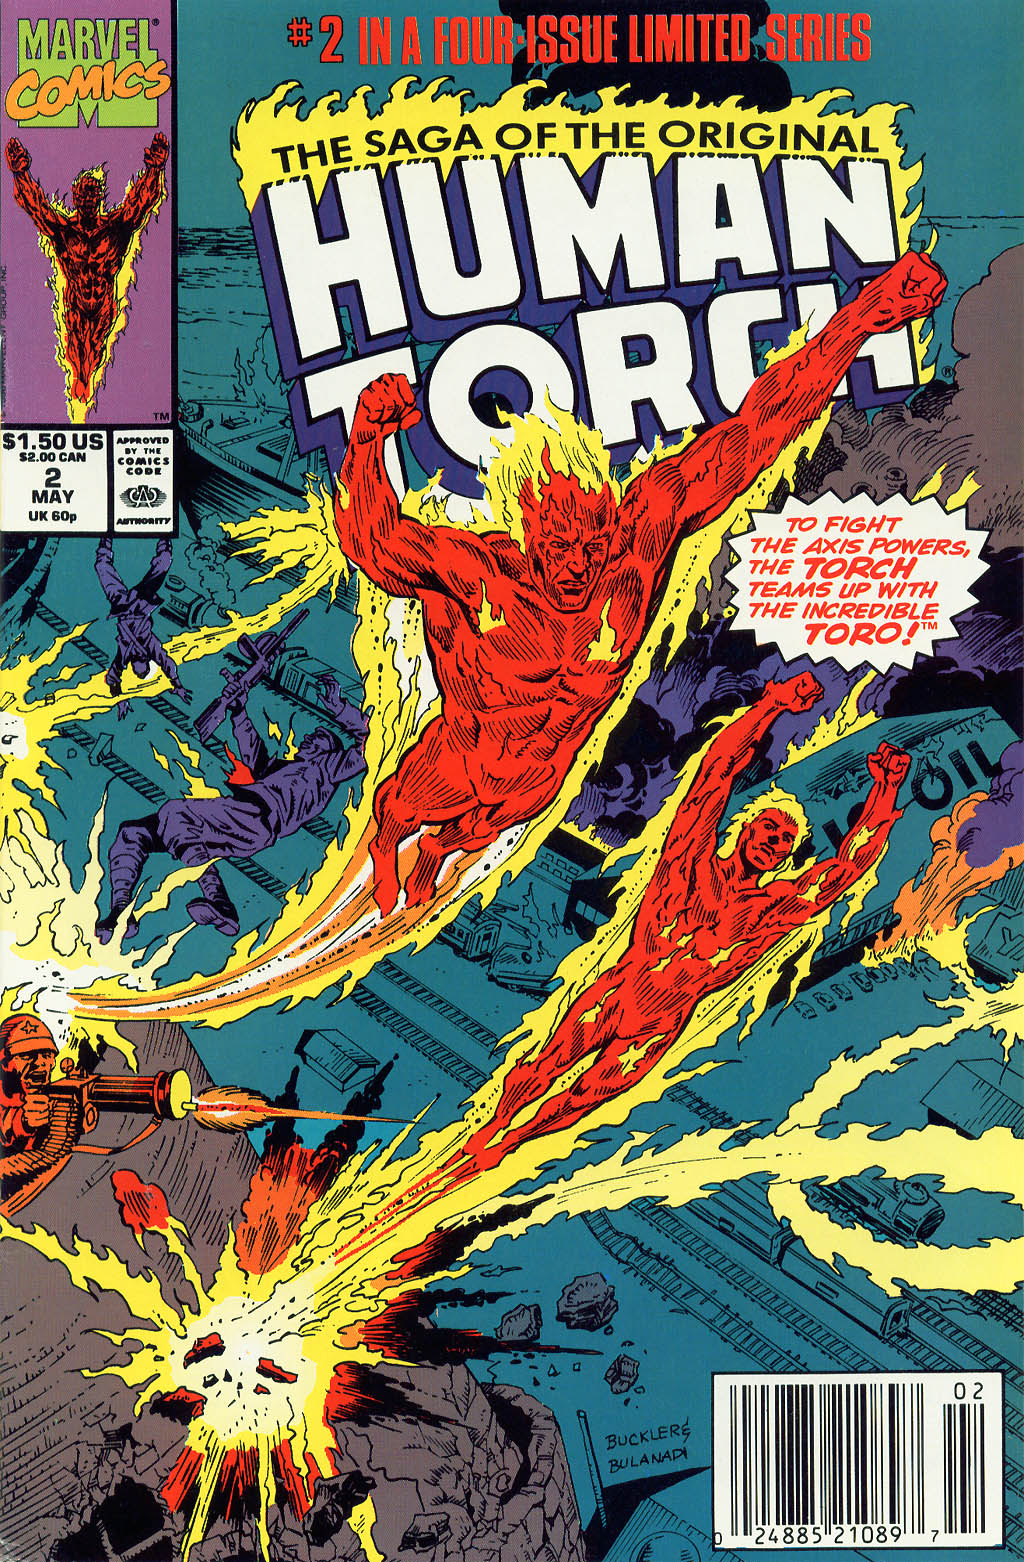 Read online The Saga of the Original Human Torch comic -  Issue #2 - 1